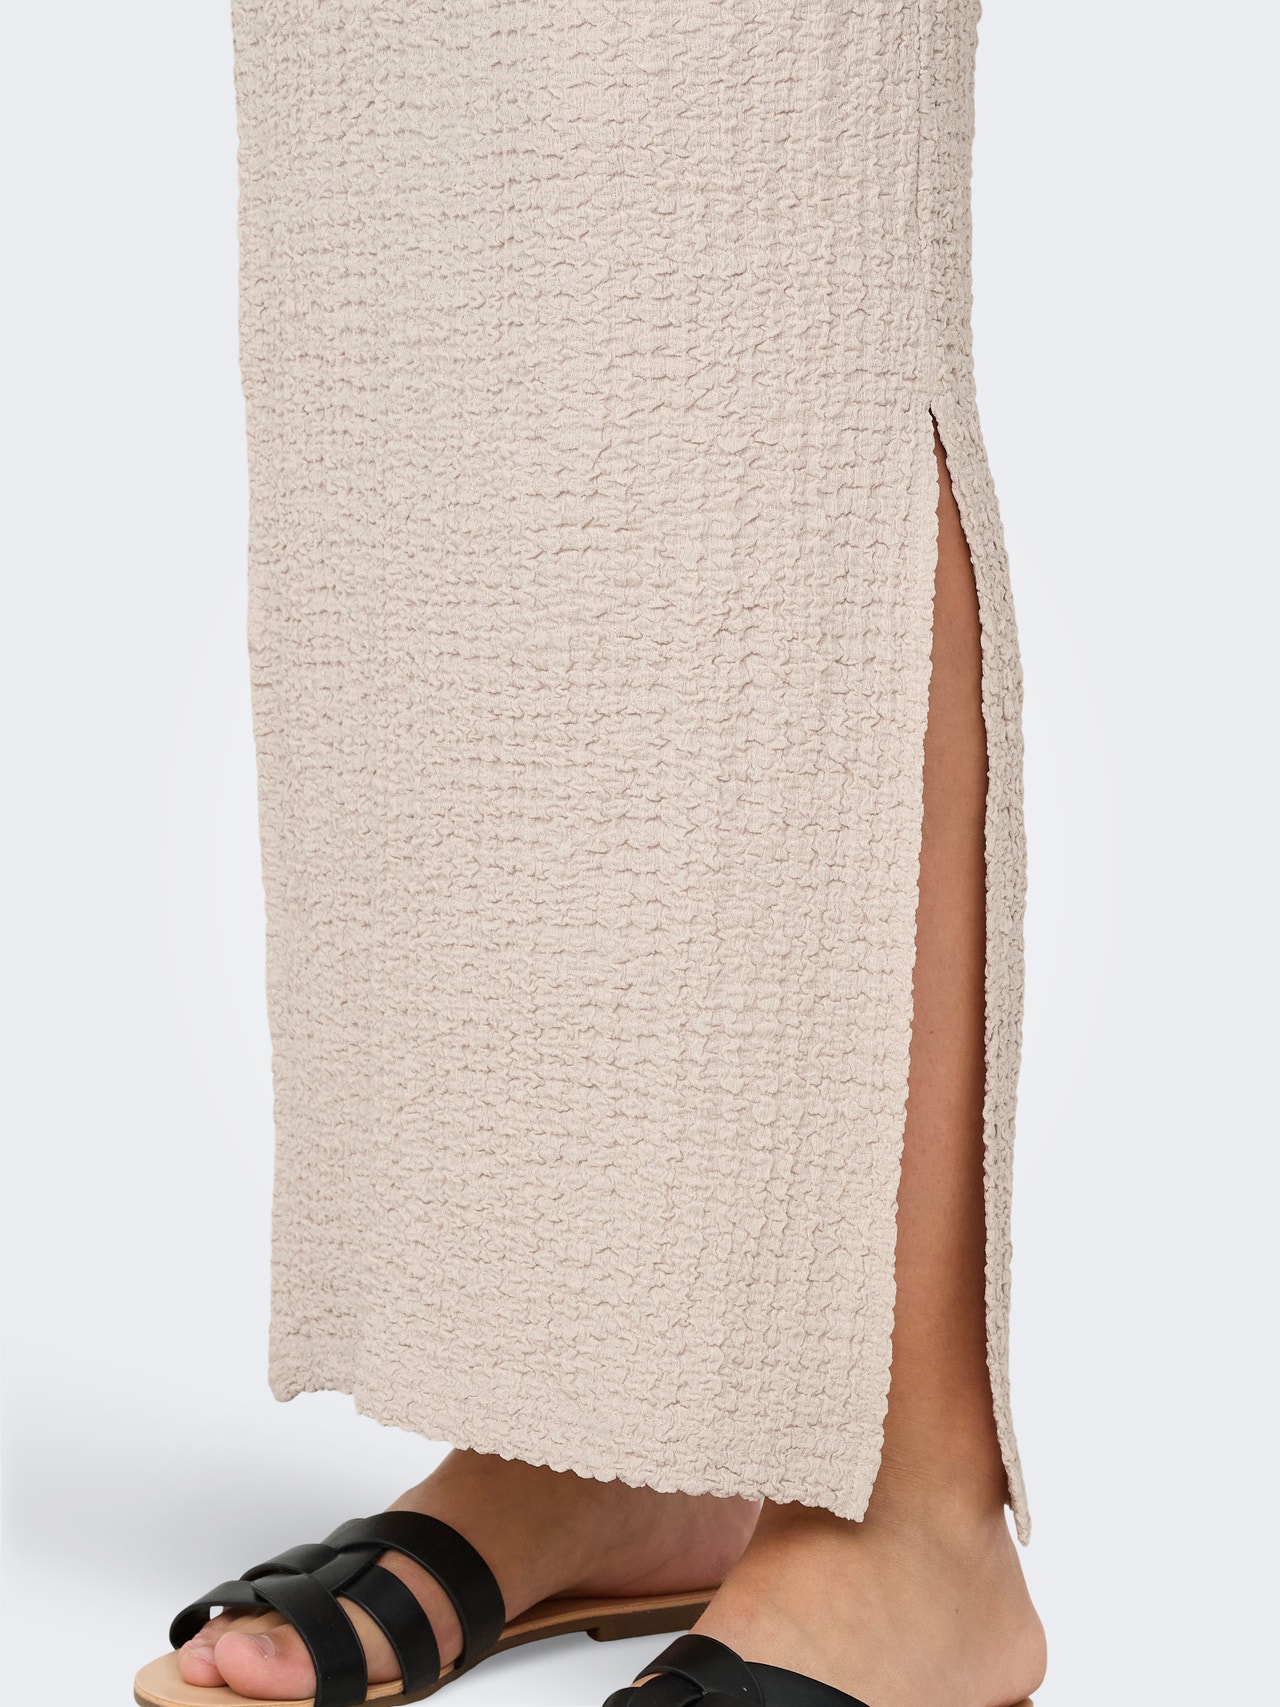 ONLY Maxi skirt with slits -Pumice Stone - 15324480